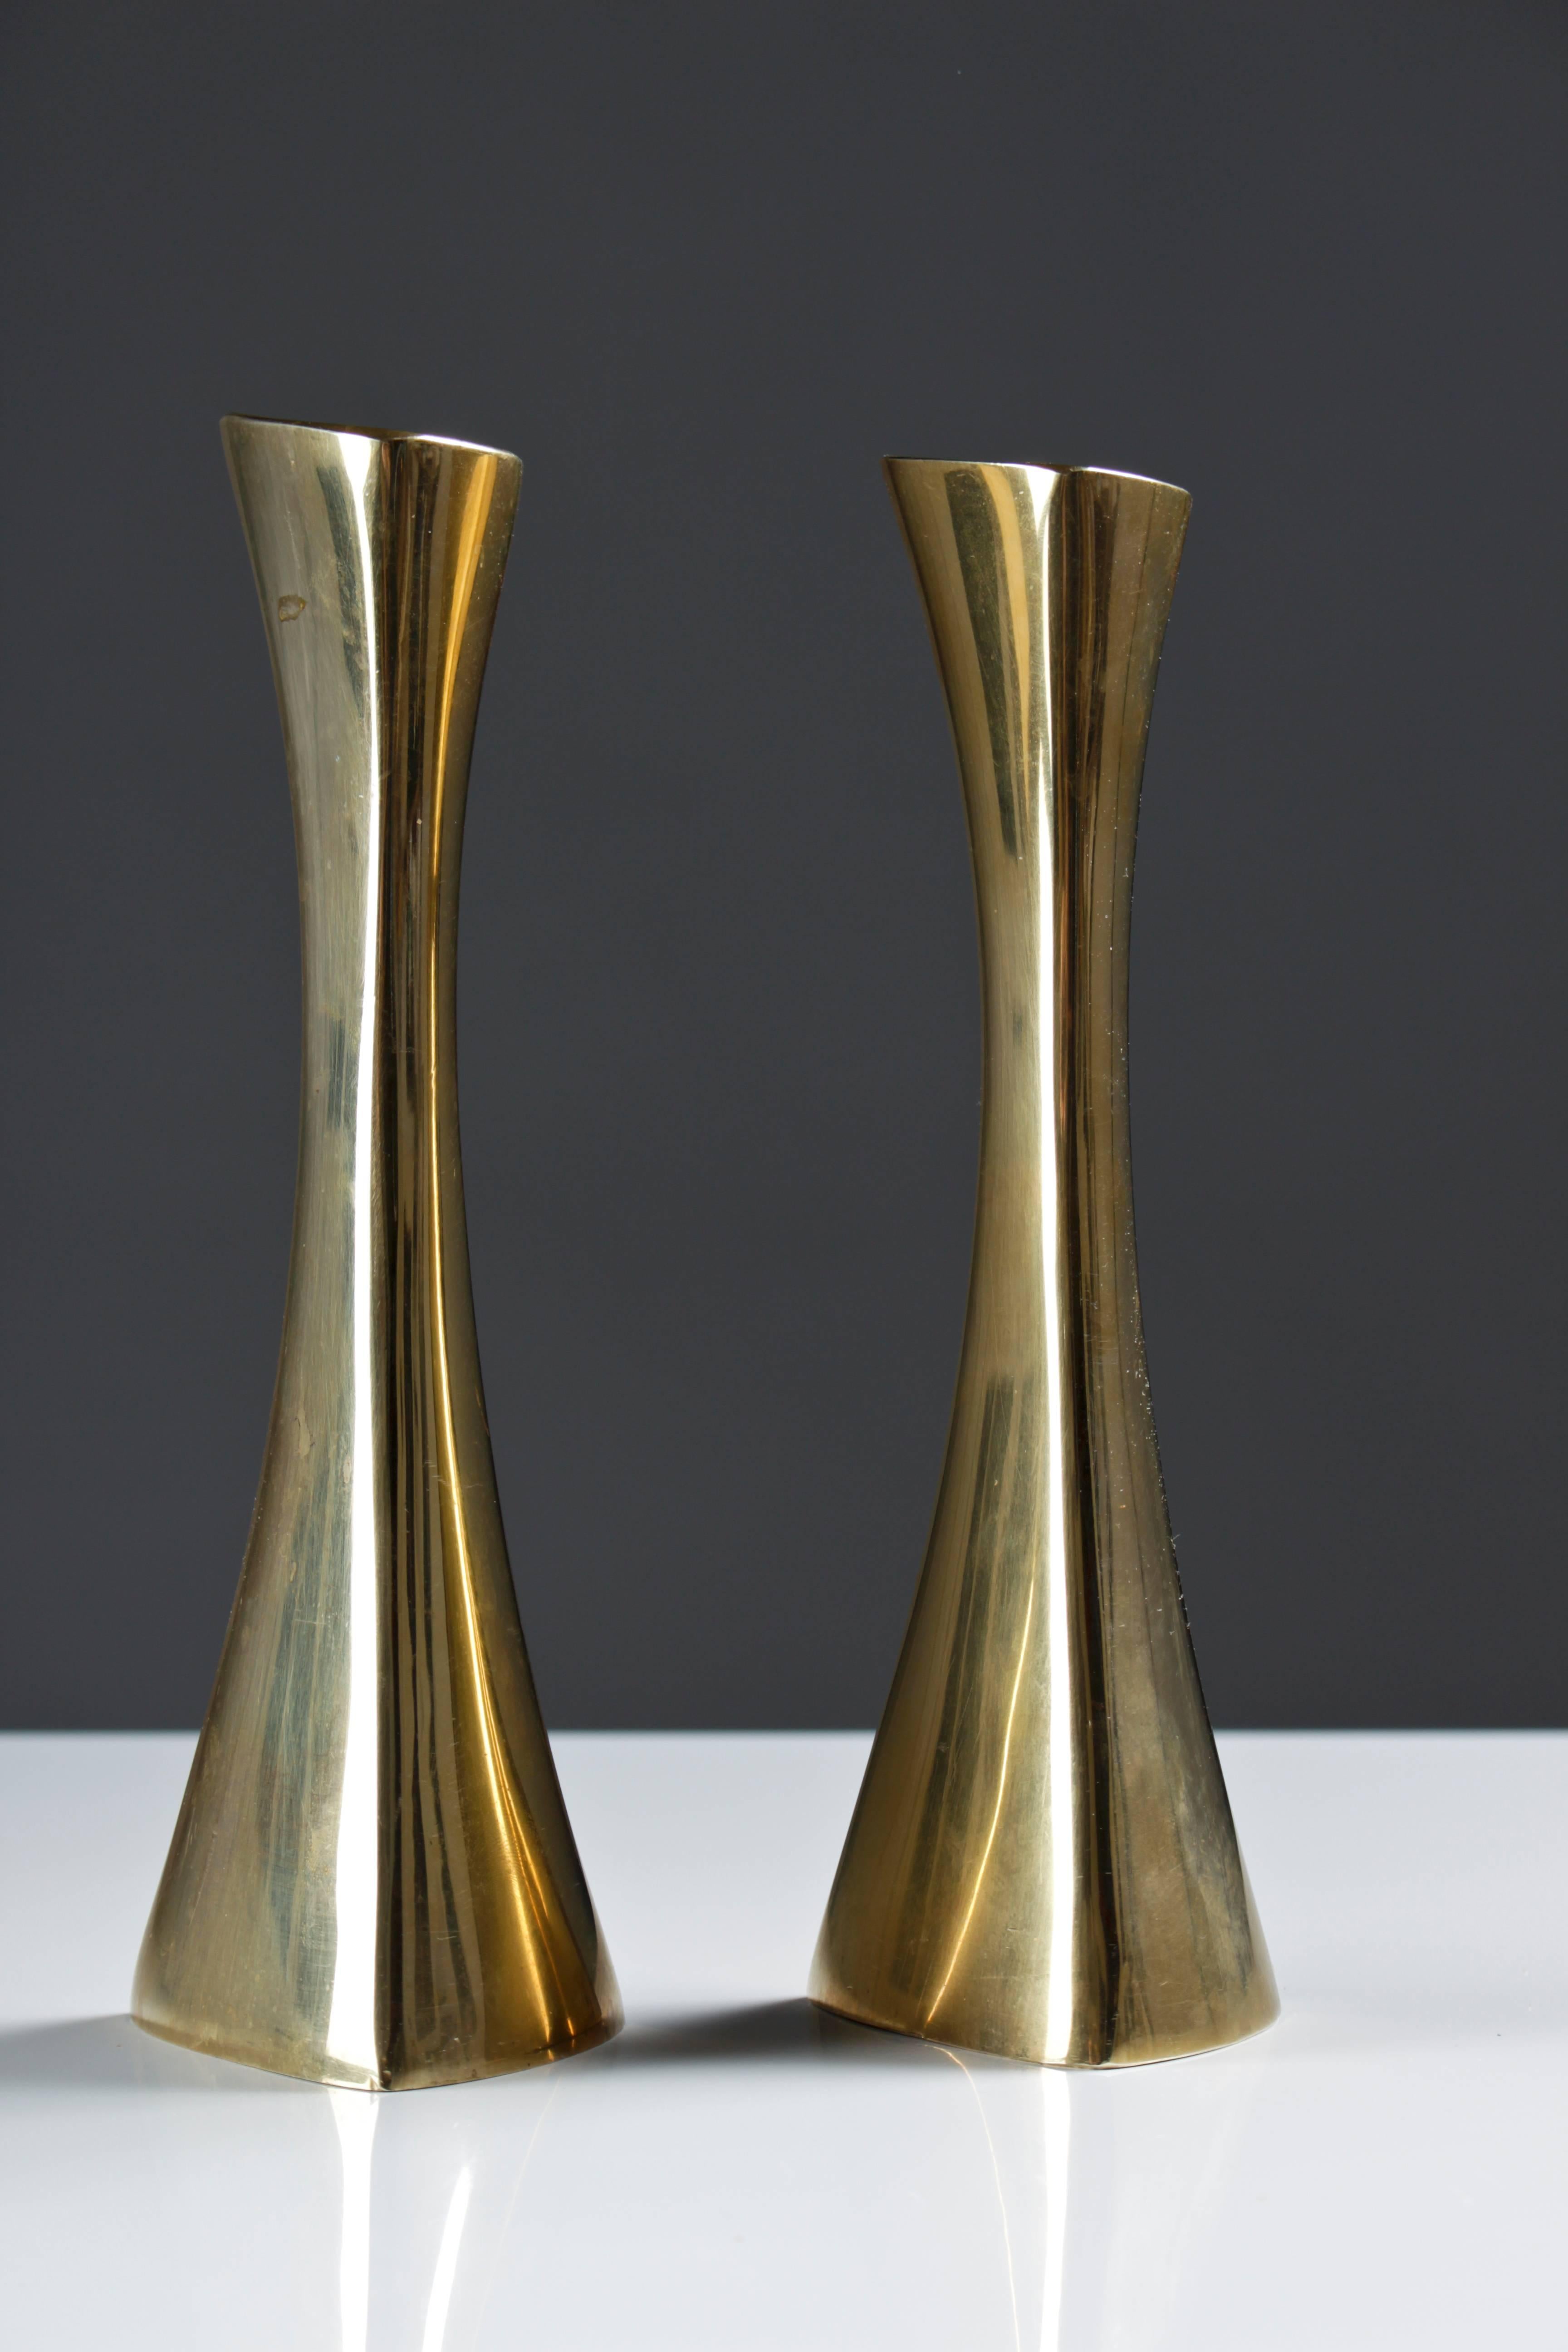 Beautiful, organic shaped candlesticks in brass by K-E Ytterberg for BCA Eskilstuna.

Condition: Very good vintage condition.